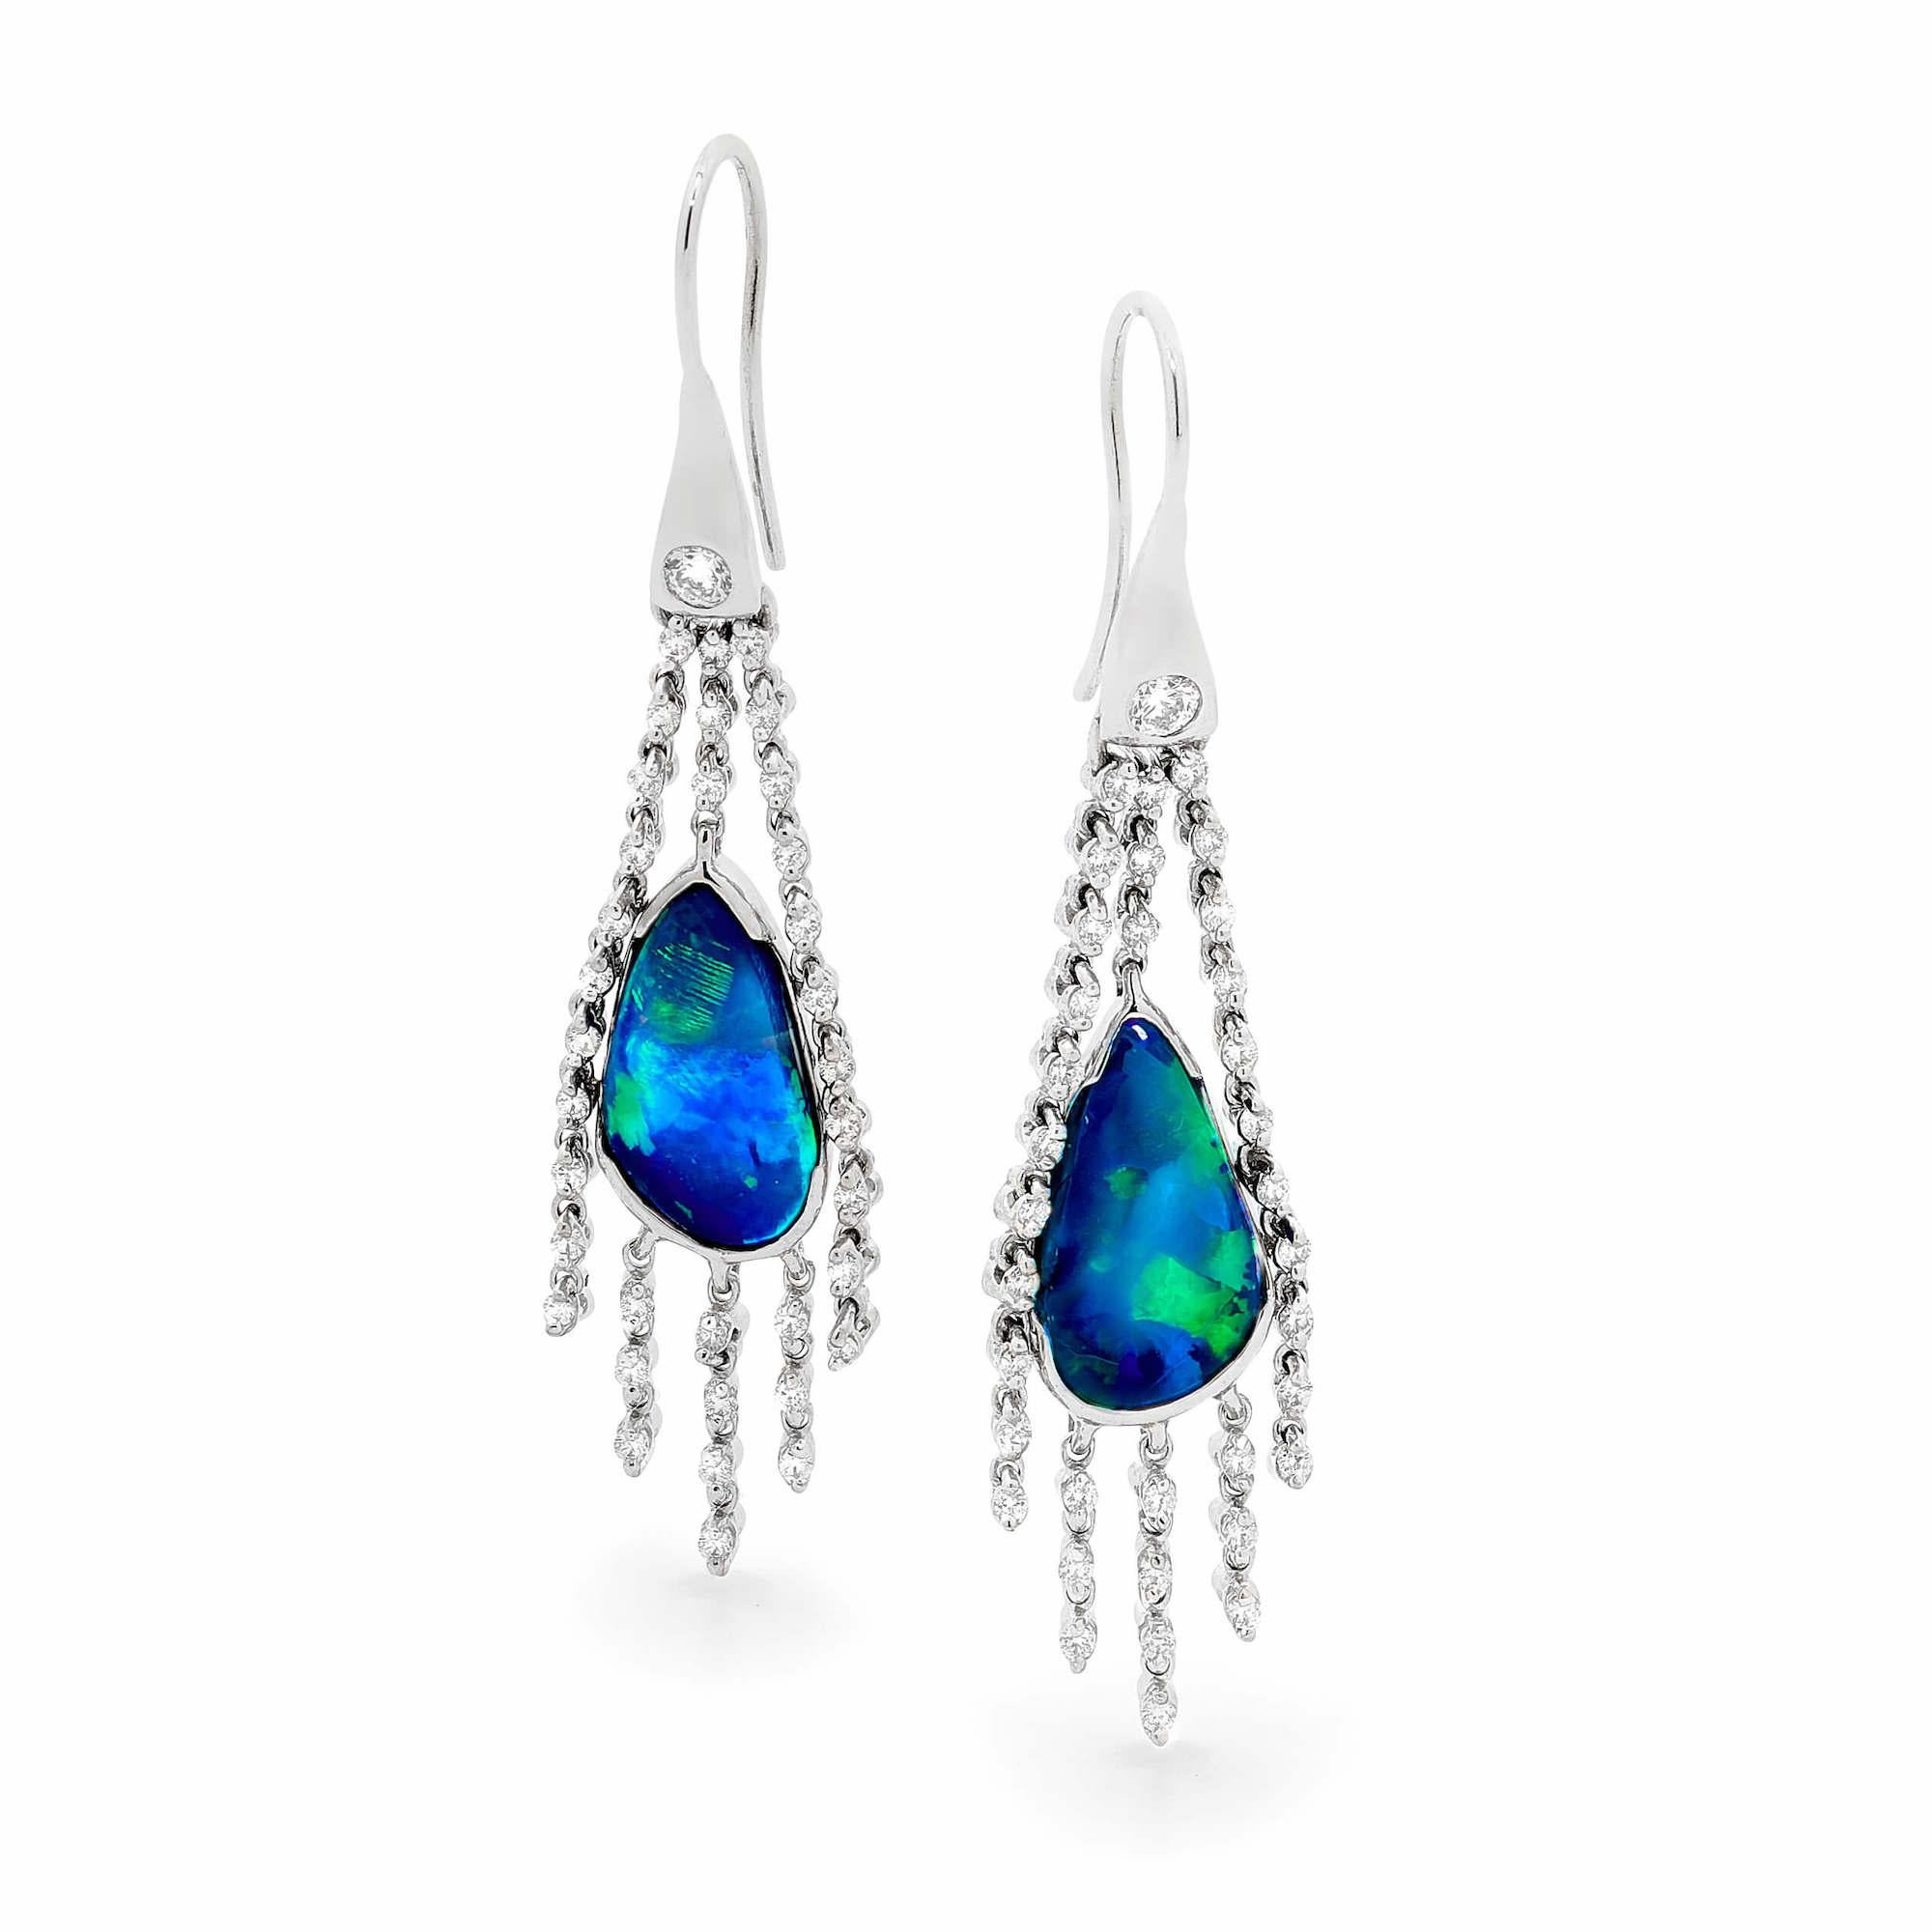 “Starry Nights” superb black opal earrings evoke the beauty of the Australian outback night sky. Black opals (5.25ct) from Lightning Ridge in 18K white gold are awash with diamonds that twinkle like stars and captivate with every movement.